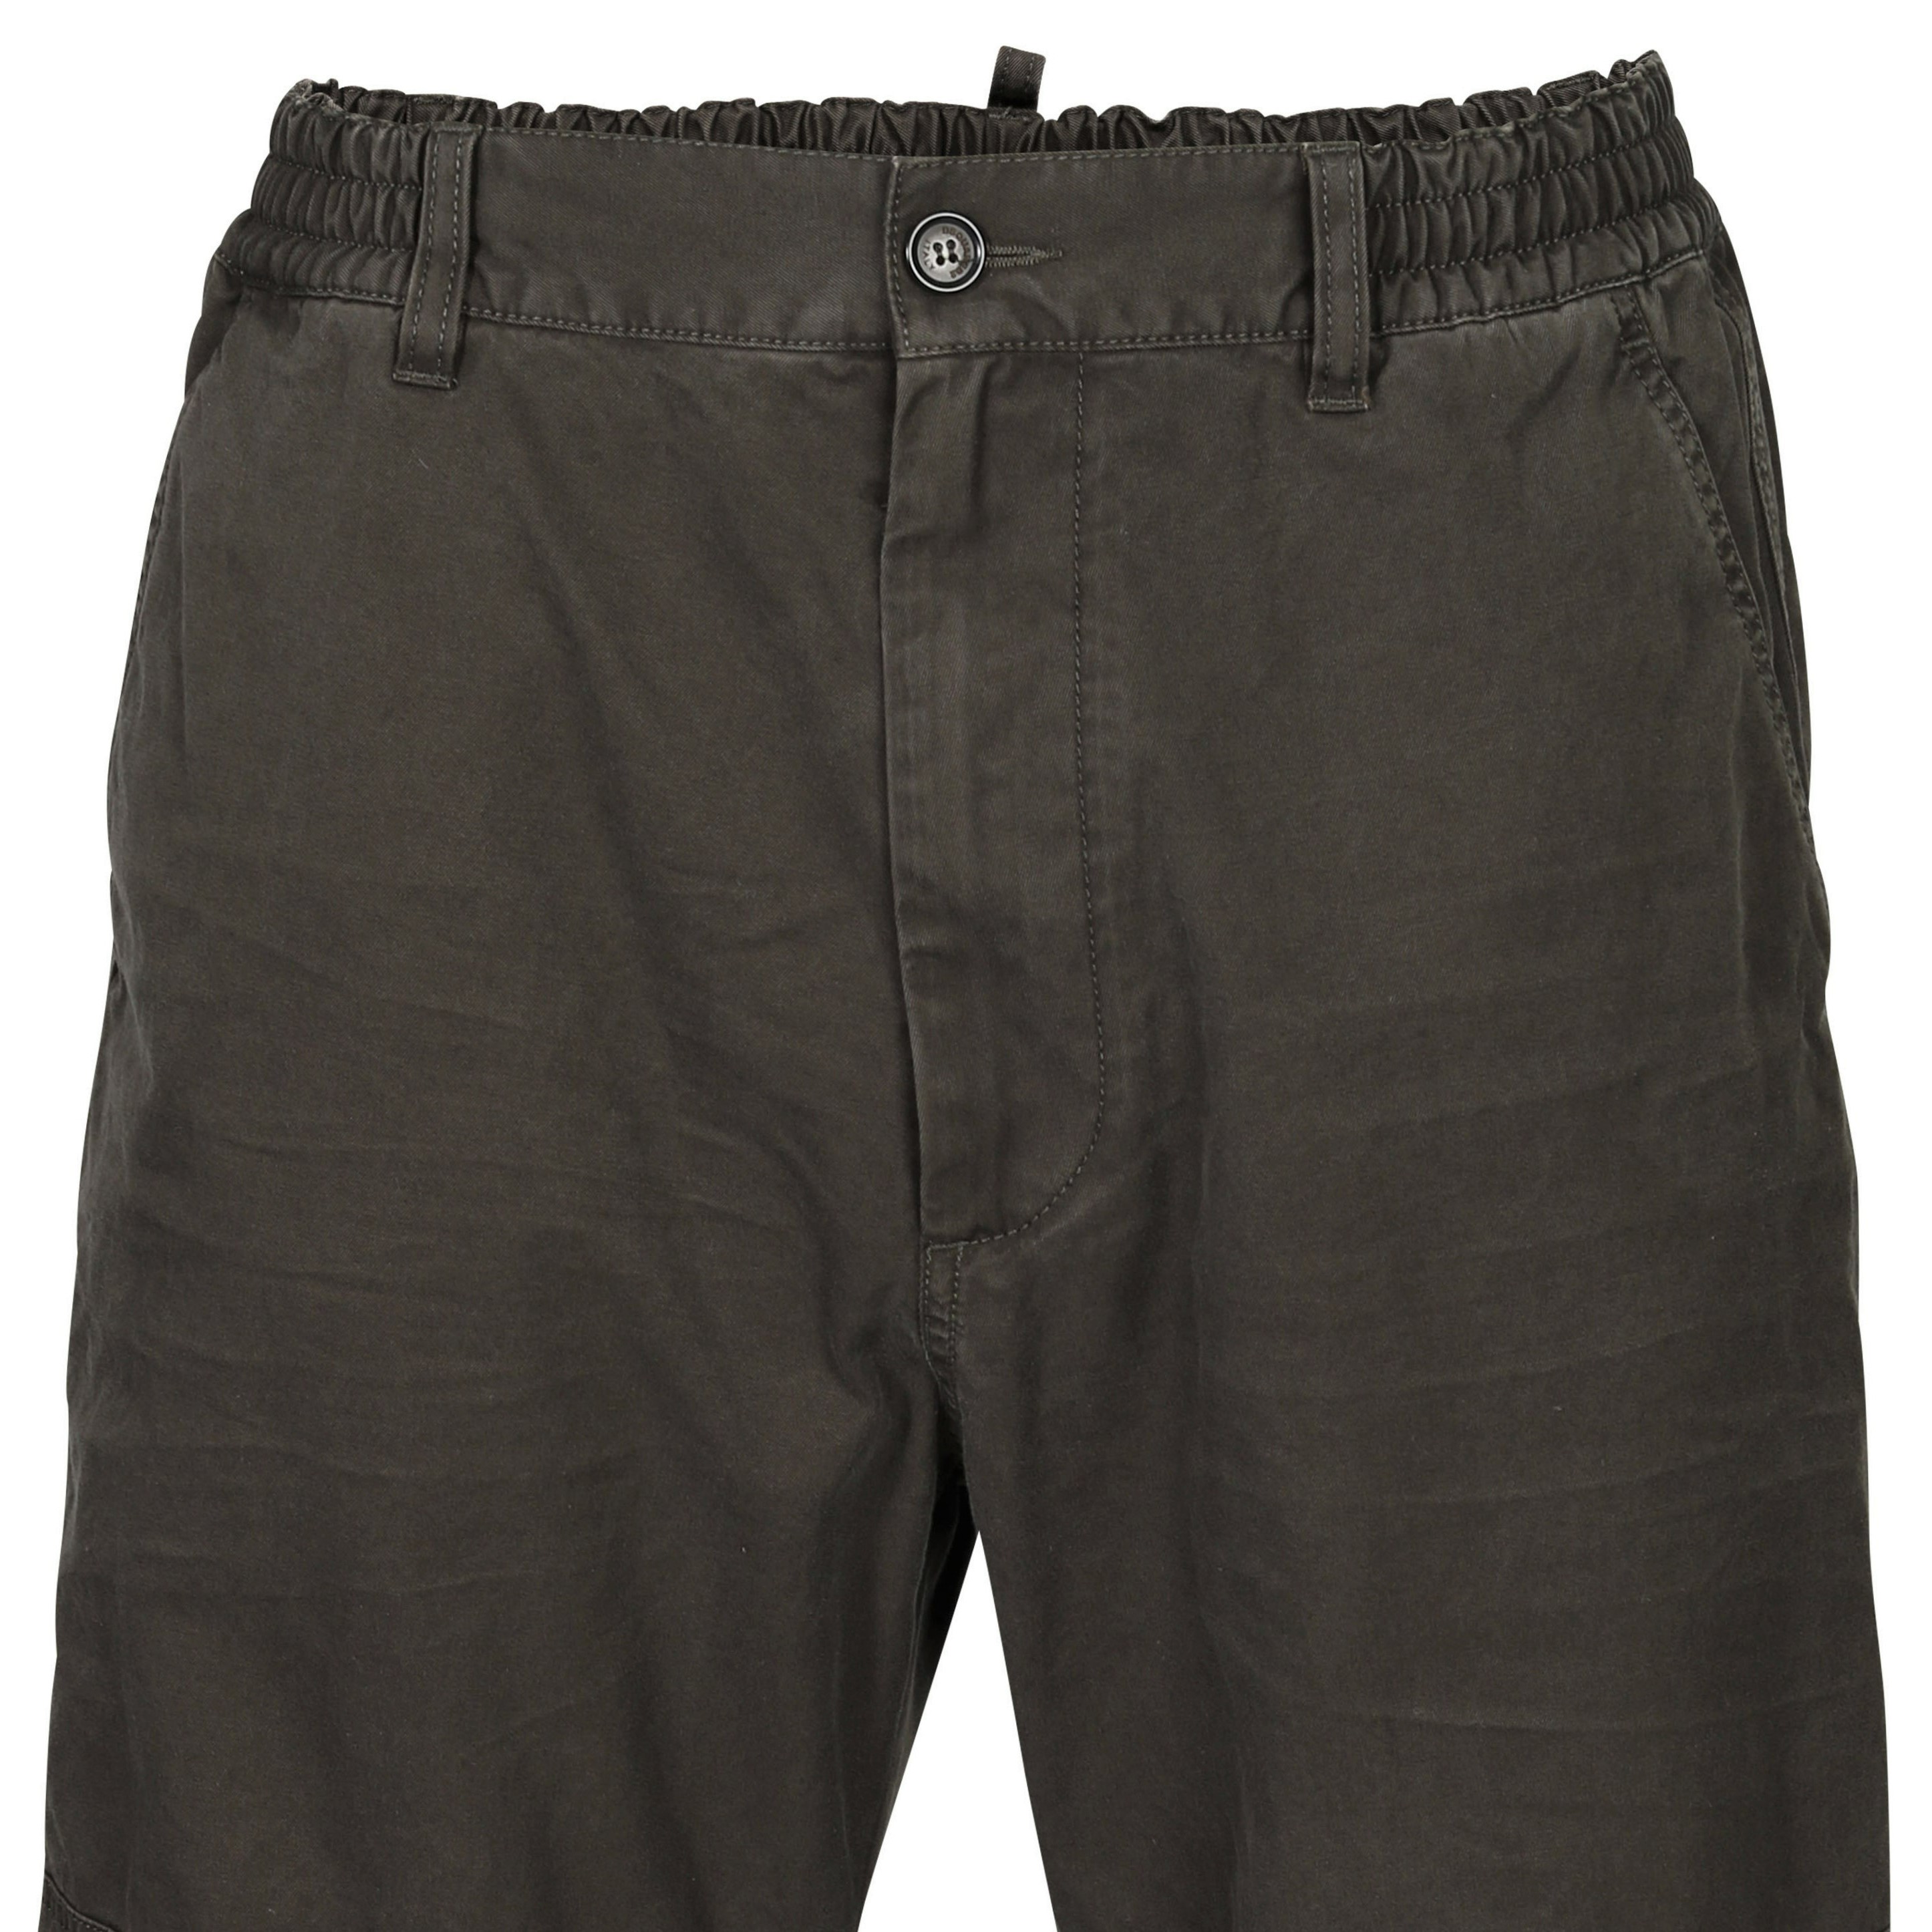 Dsquared Pully Pant in Dark Olive 52